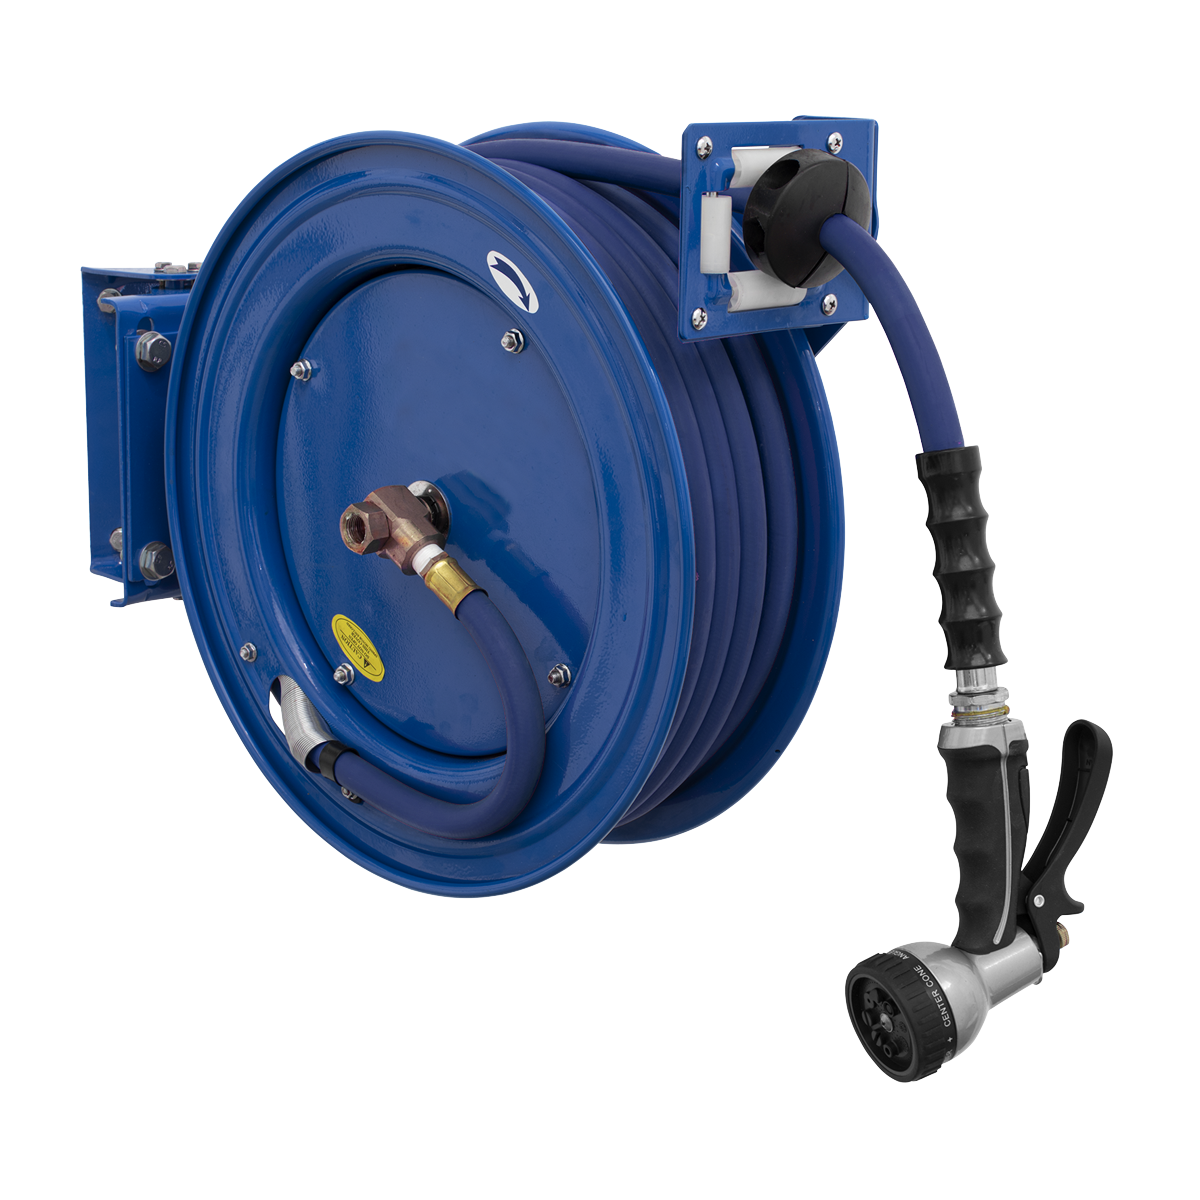 Sealey WHR1512 Heavy-Duty Retractable Water Hose Reel 15m ø13mm ID Rubber  Hose from Lawson HIS